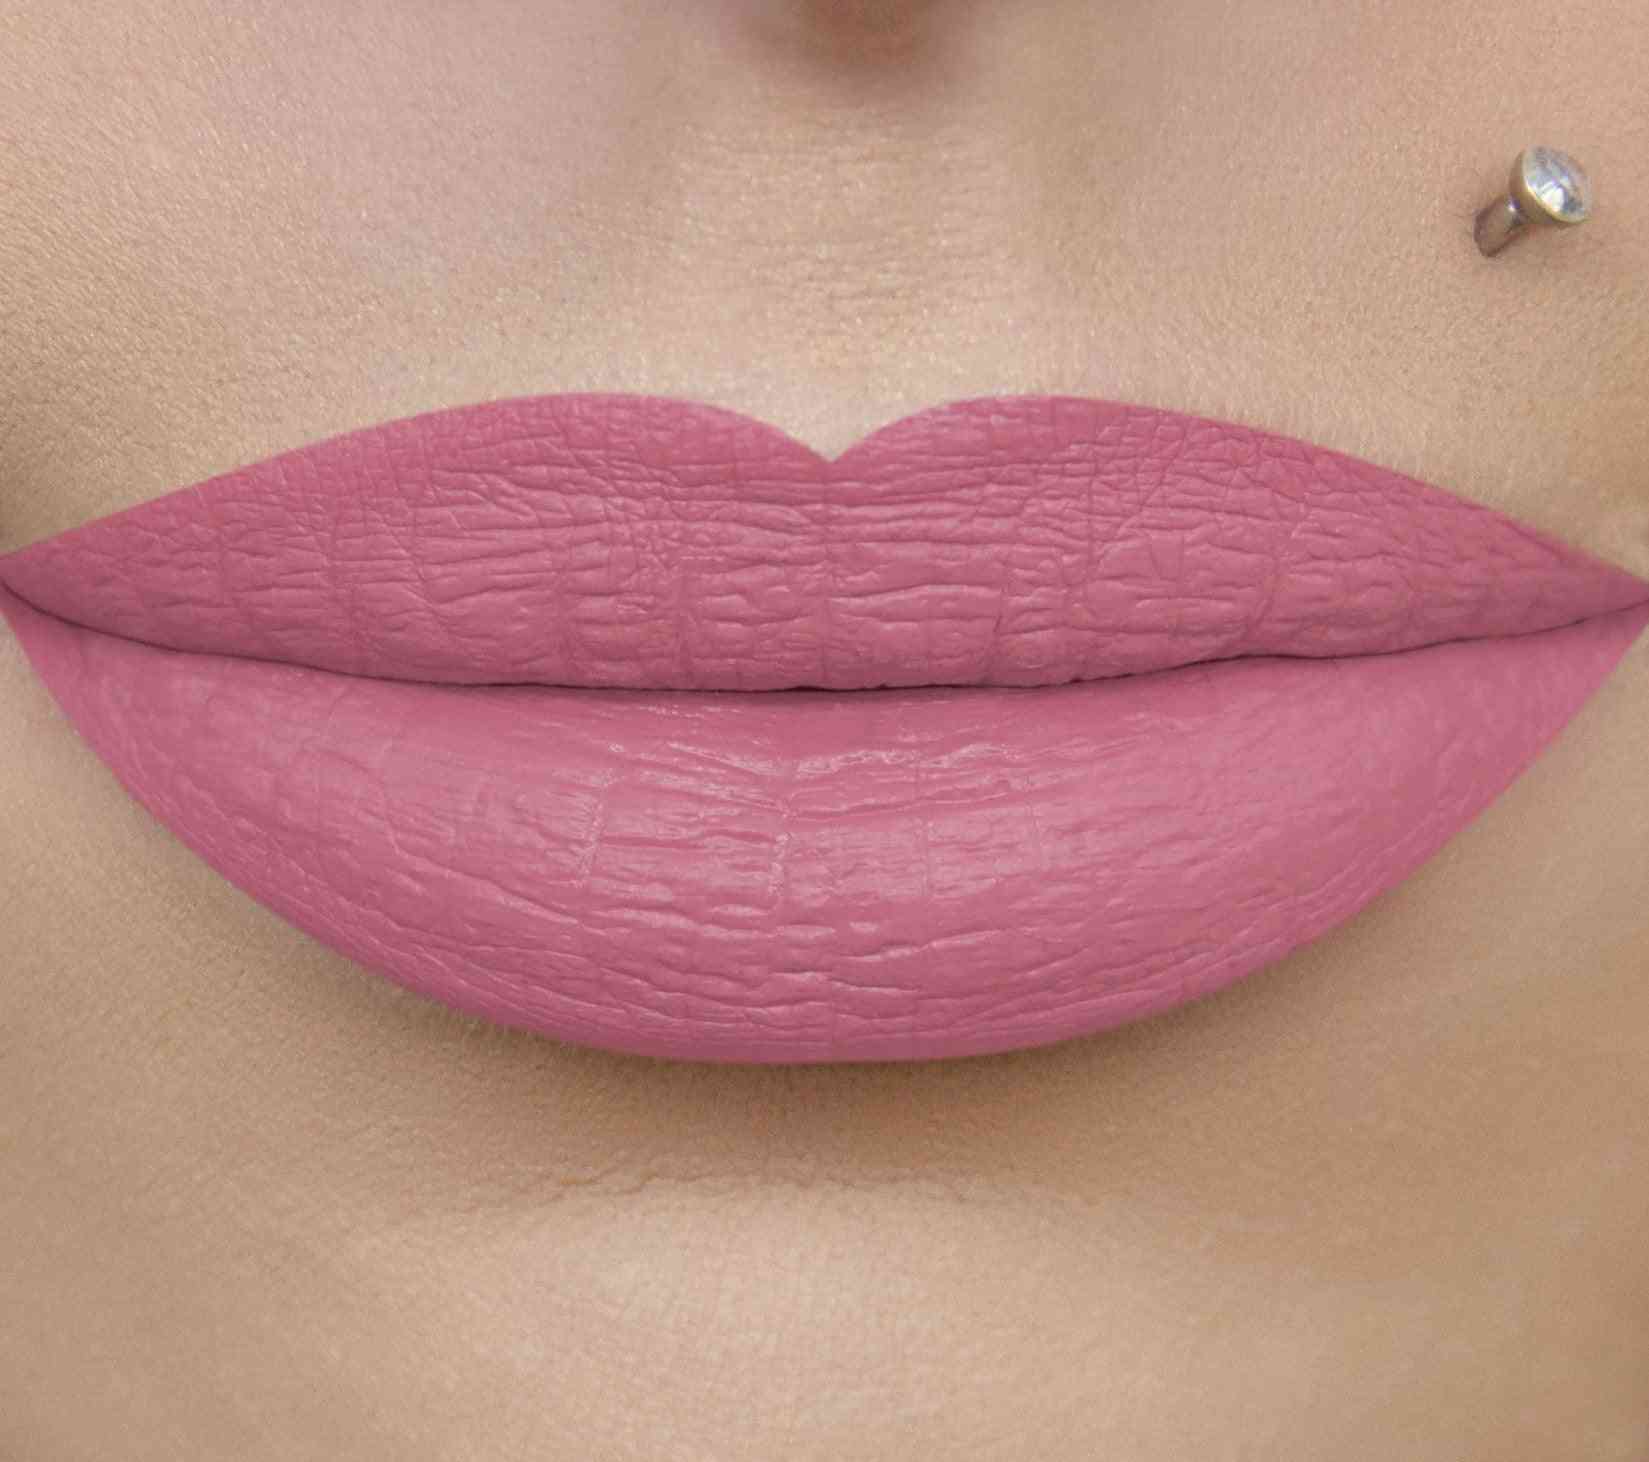 Full Coverage, Long Lasting Baby Pink Lipstick